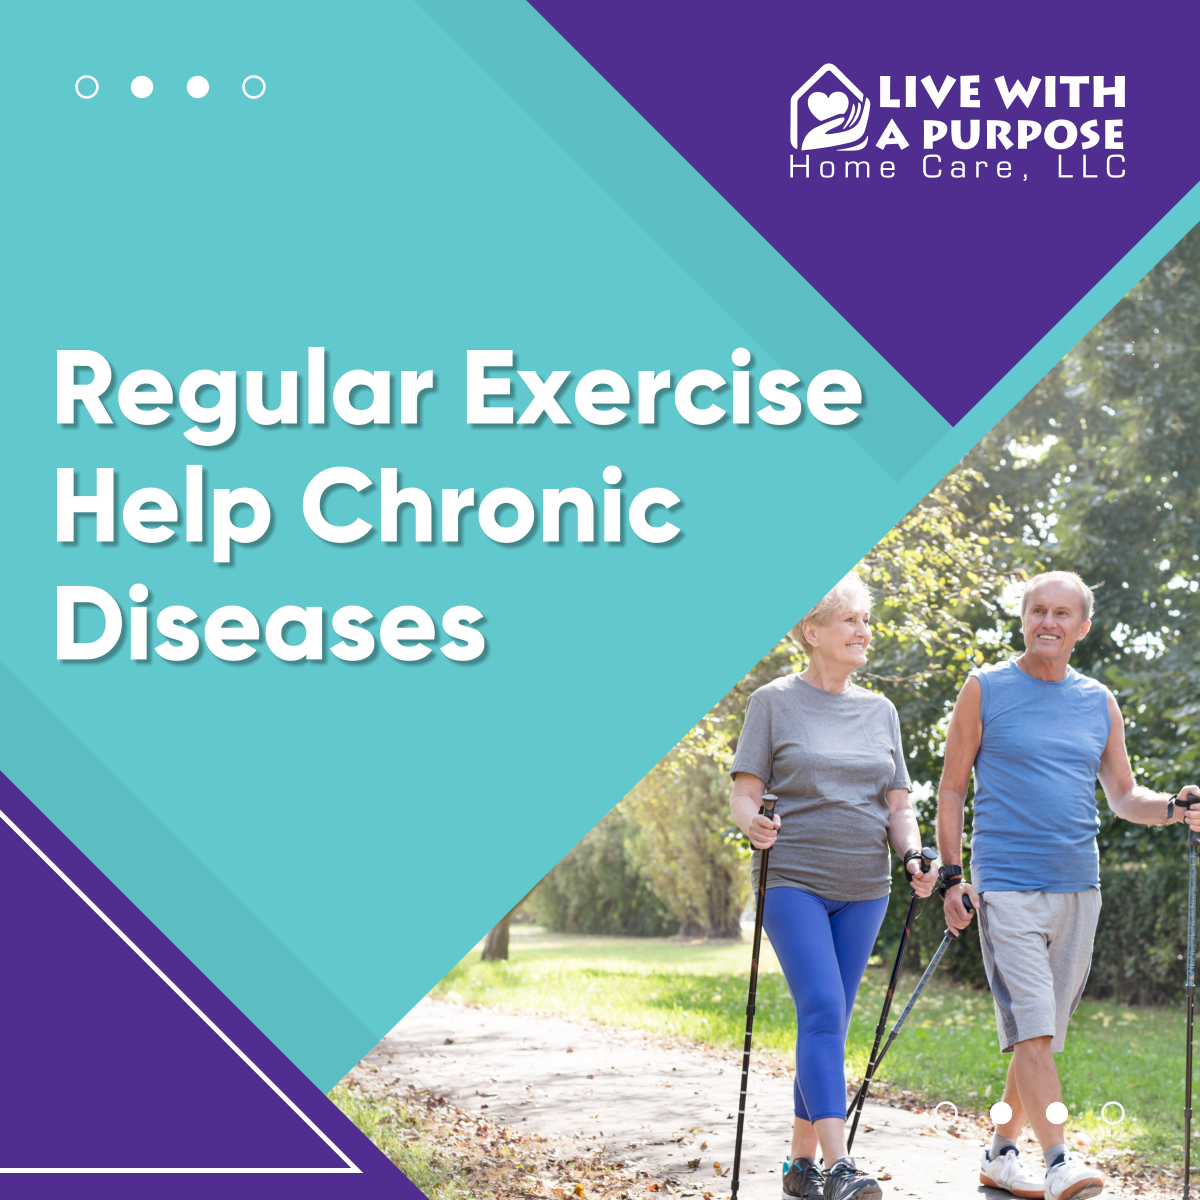 Did you know that regular exercise can help reduce the risk of chronic diseases such as diabetes, heart disease, and certain cancers?

Read more:
facebook.com/permalink.php?…

#StaffordVA #HomeCare #RegularExercise #ChronicDiseases #Seniors